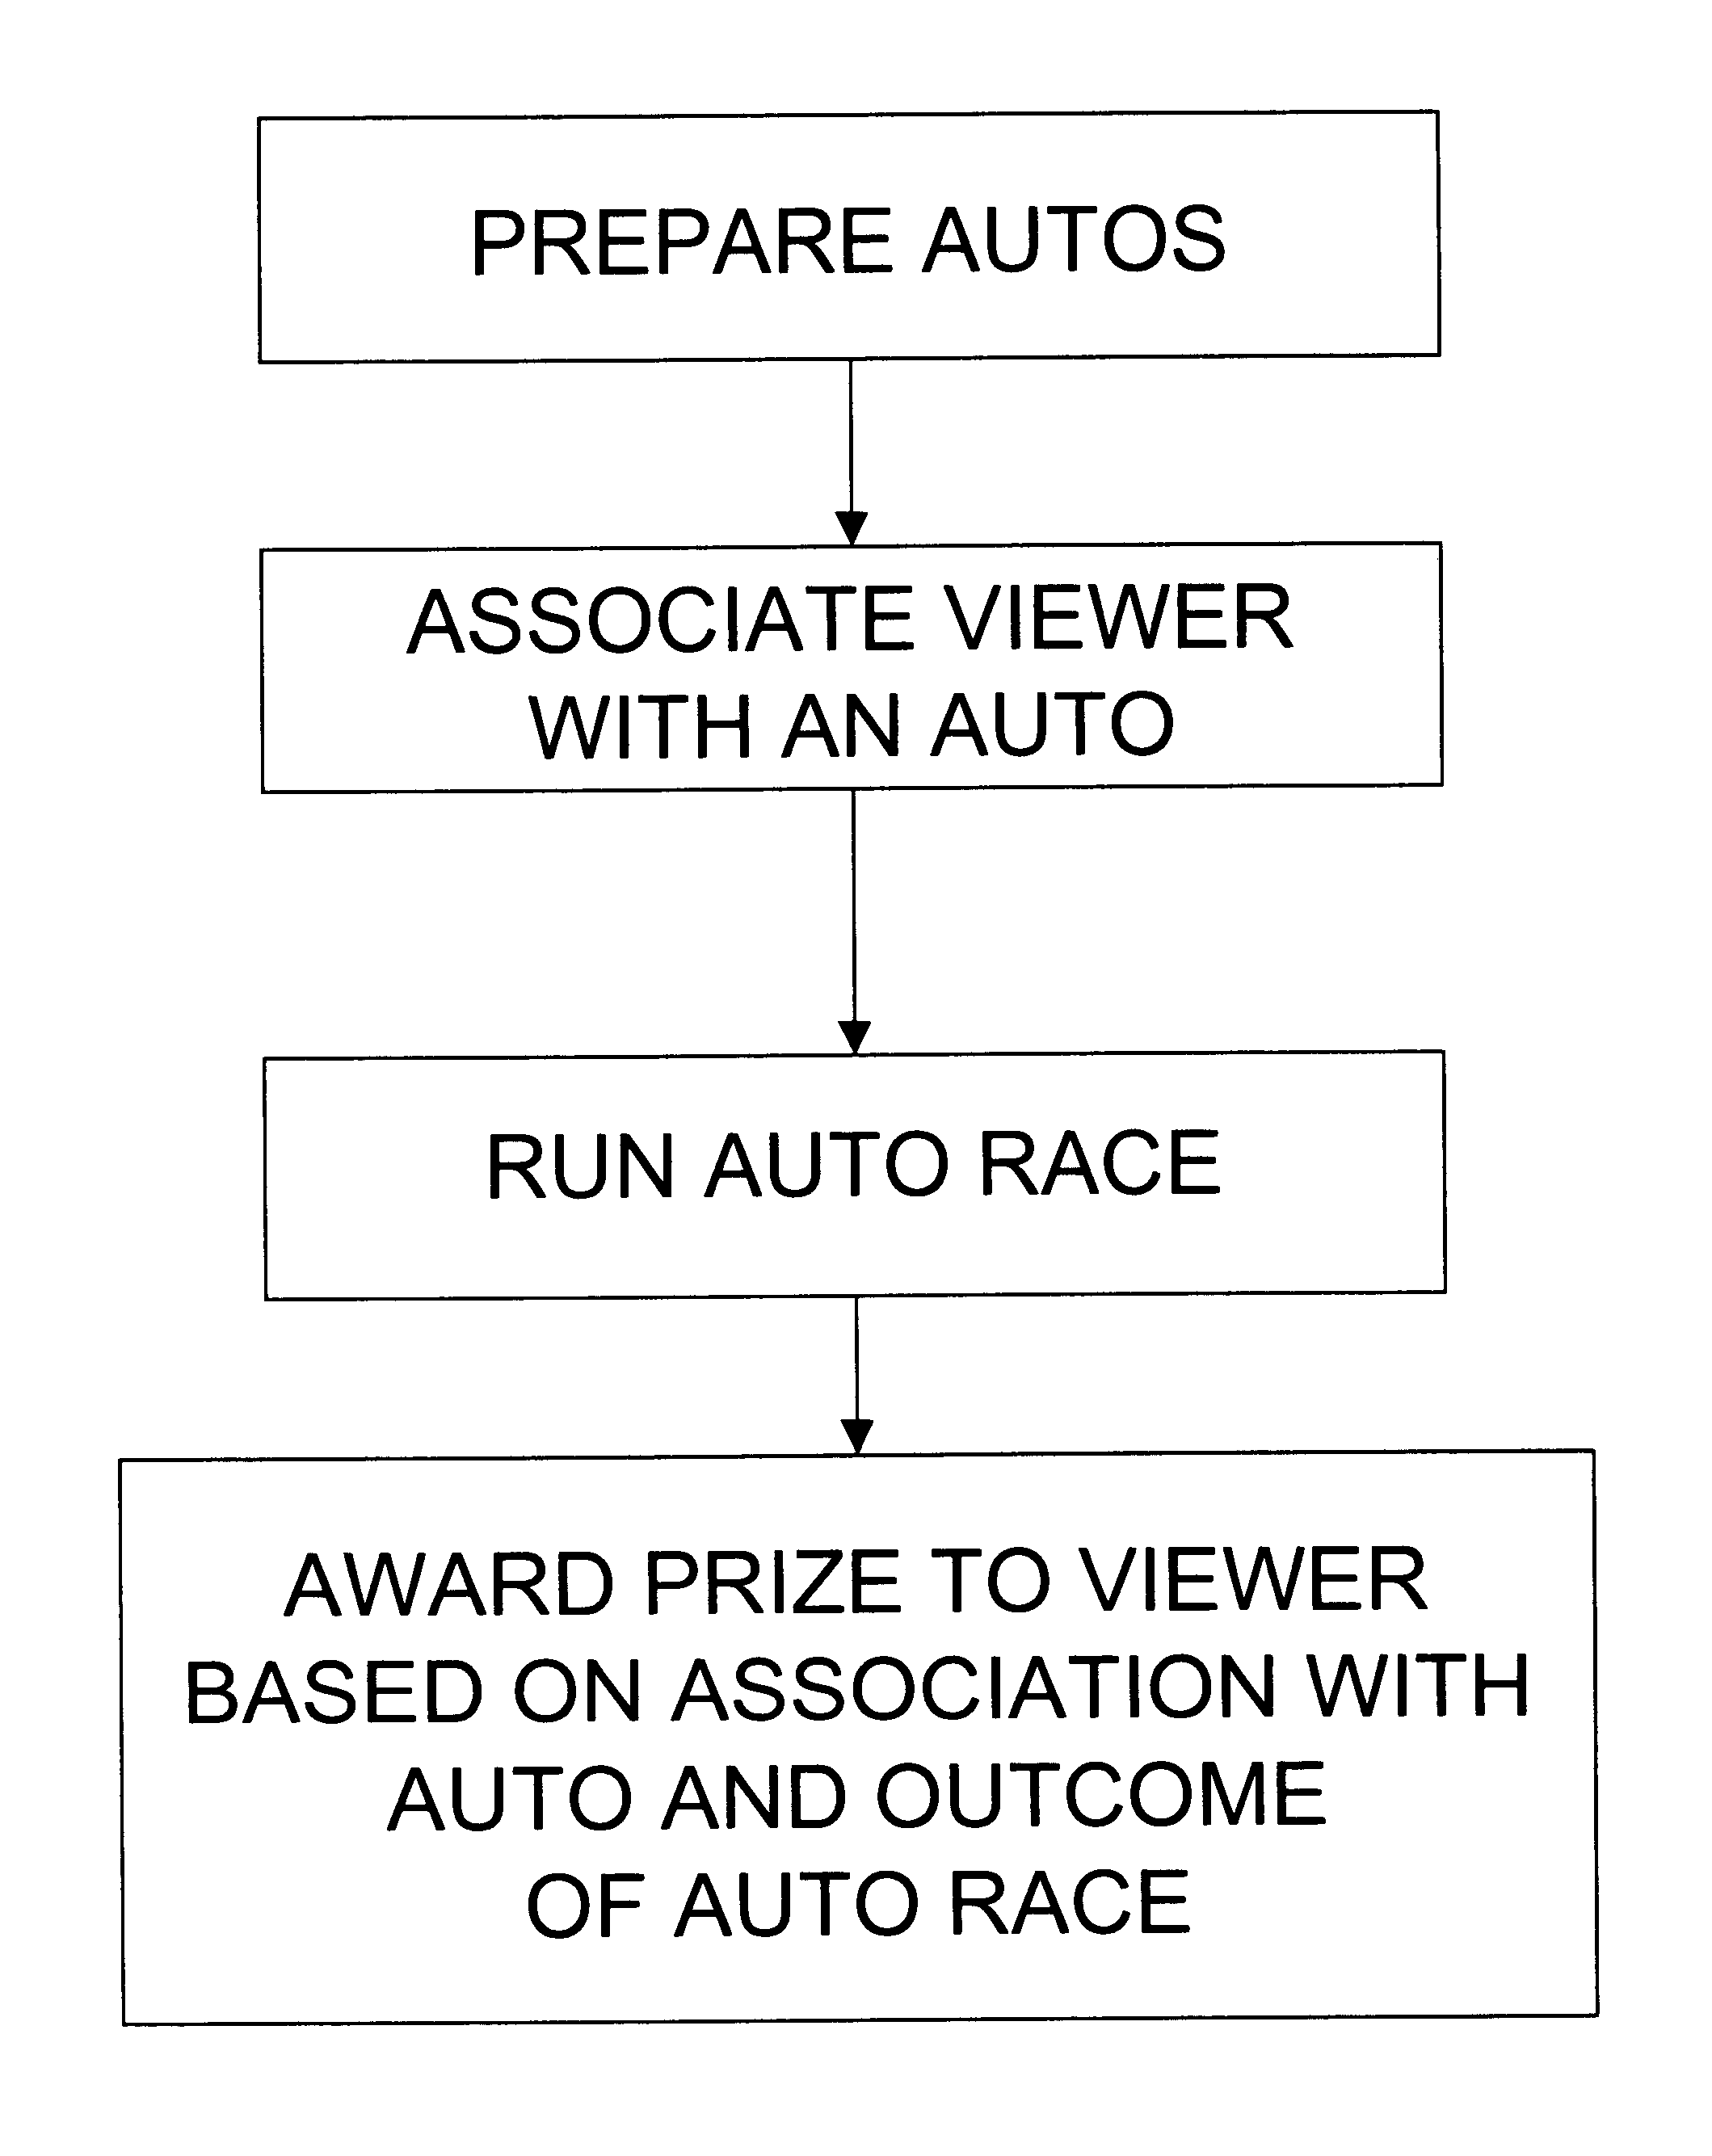 System and method for maintaining audience interest in productions, including anonymous auto race